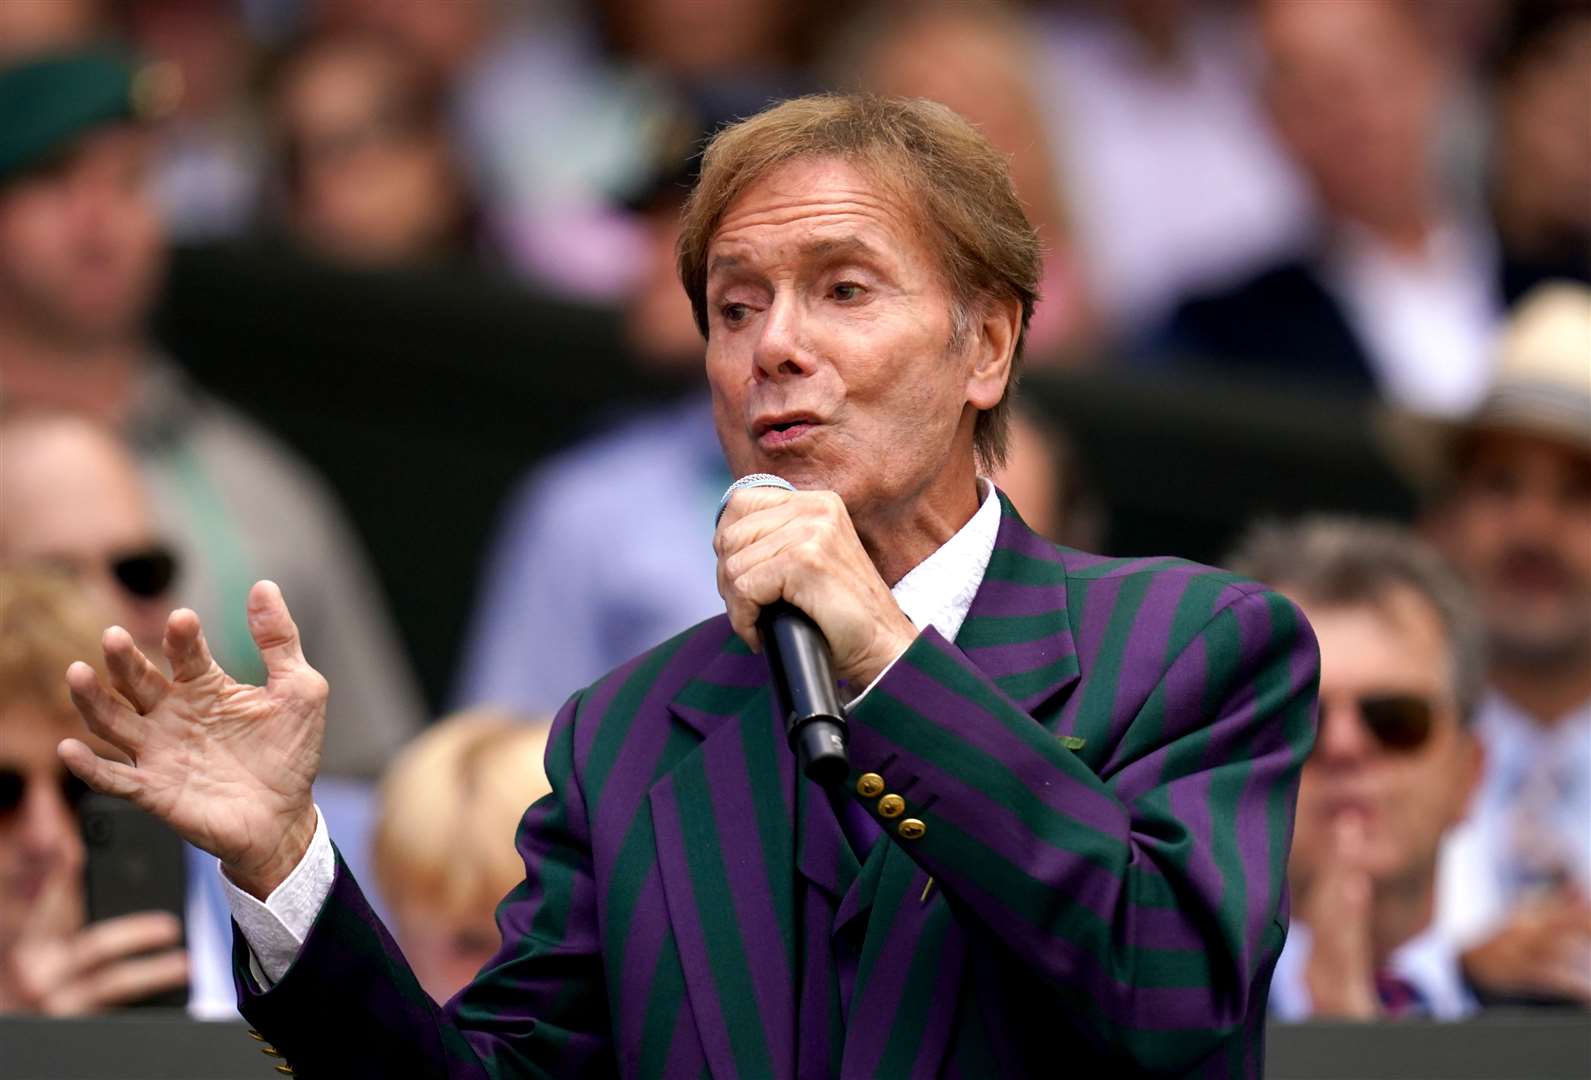 Sir Cliff Richard won a privacy case against the BBC over its coverage of a 2014 South Yorkshire Police raid on his home (John Walton/PA)